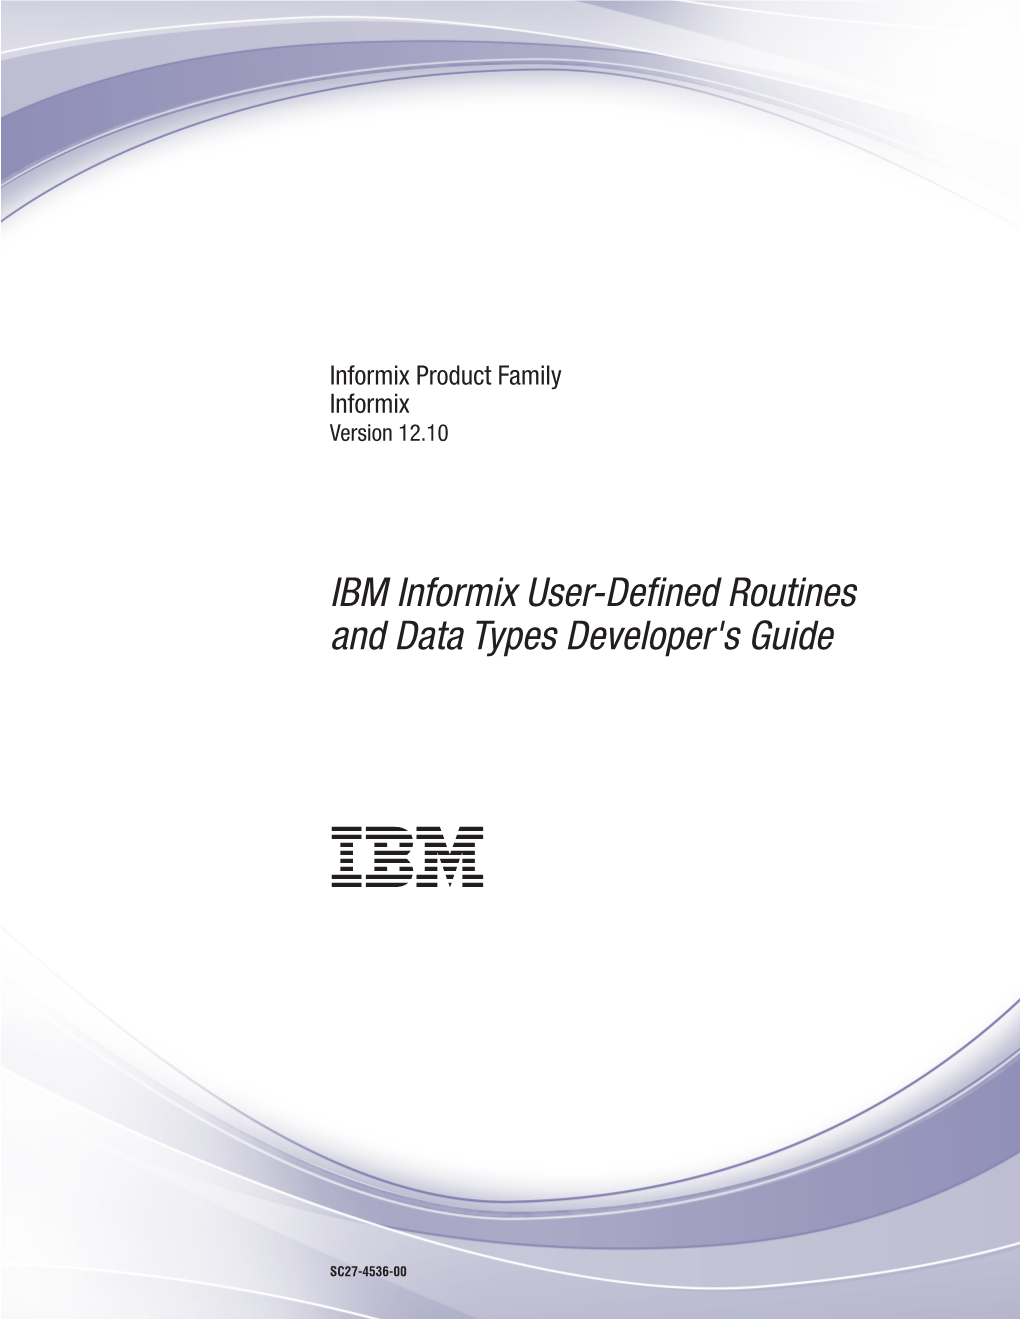 IBM Informix User-Defined Routines and Data Types Developer's Guide